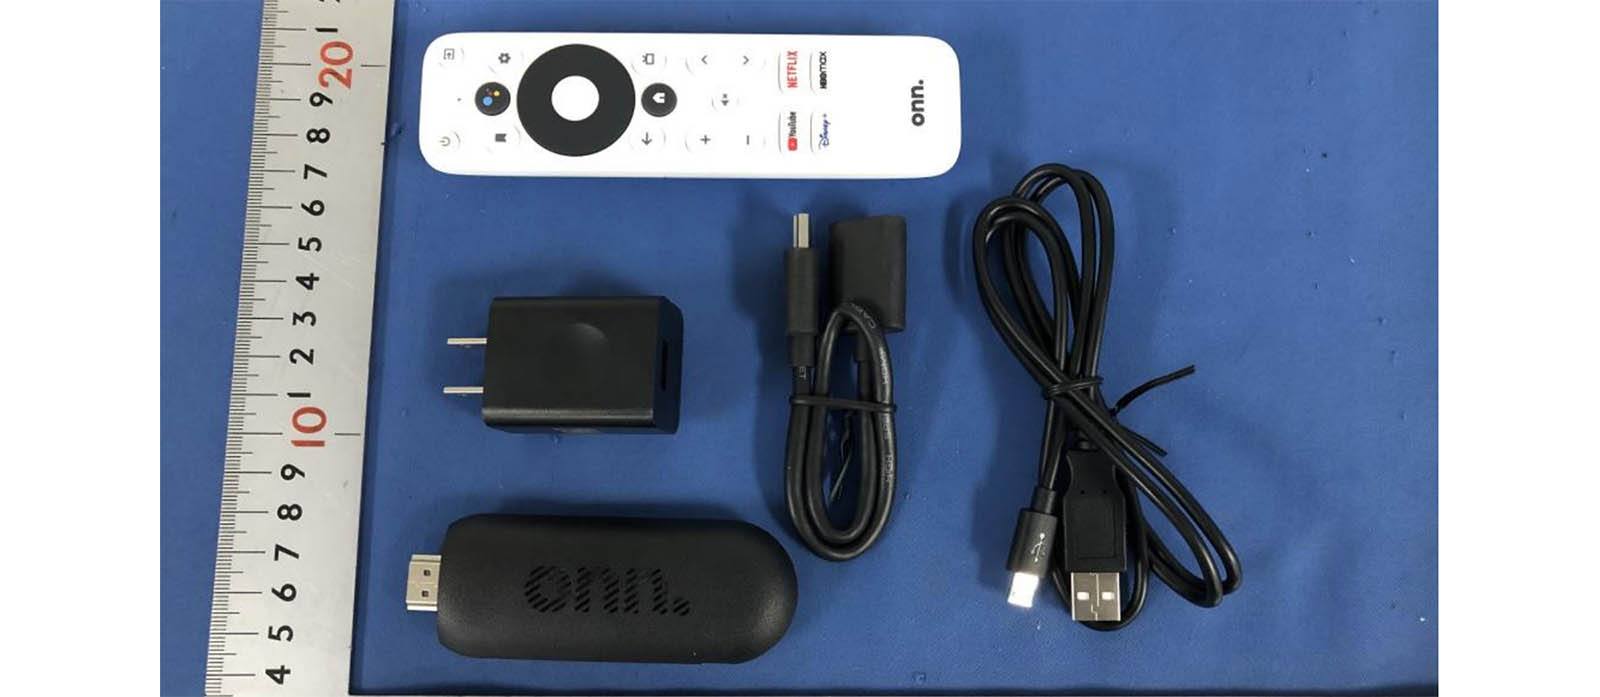 An FCC photo of a potential Walmart streaming device